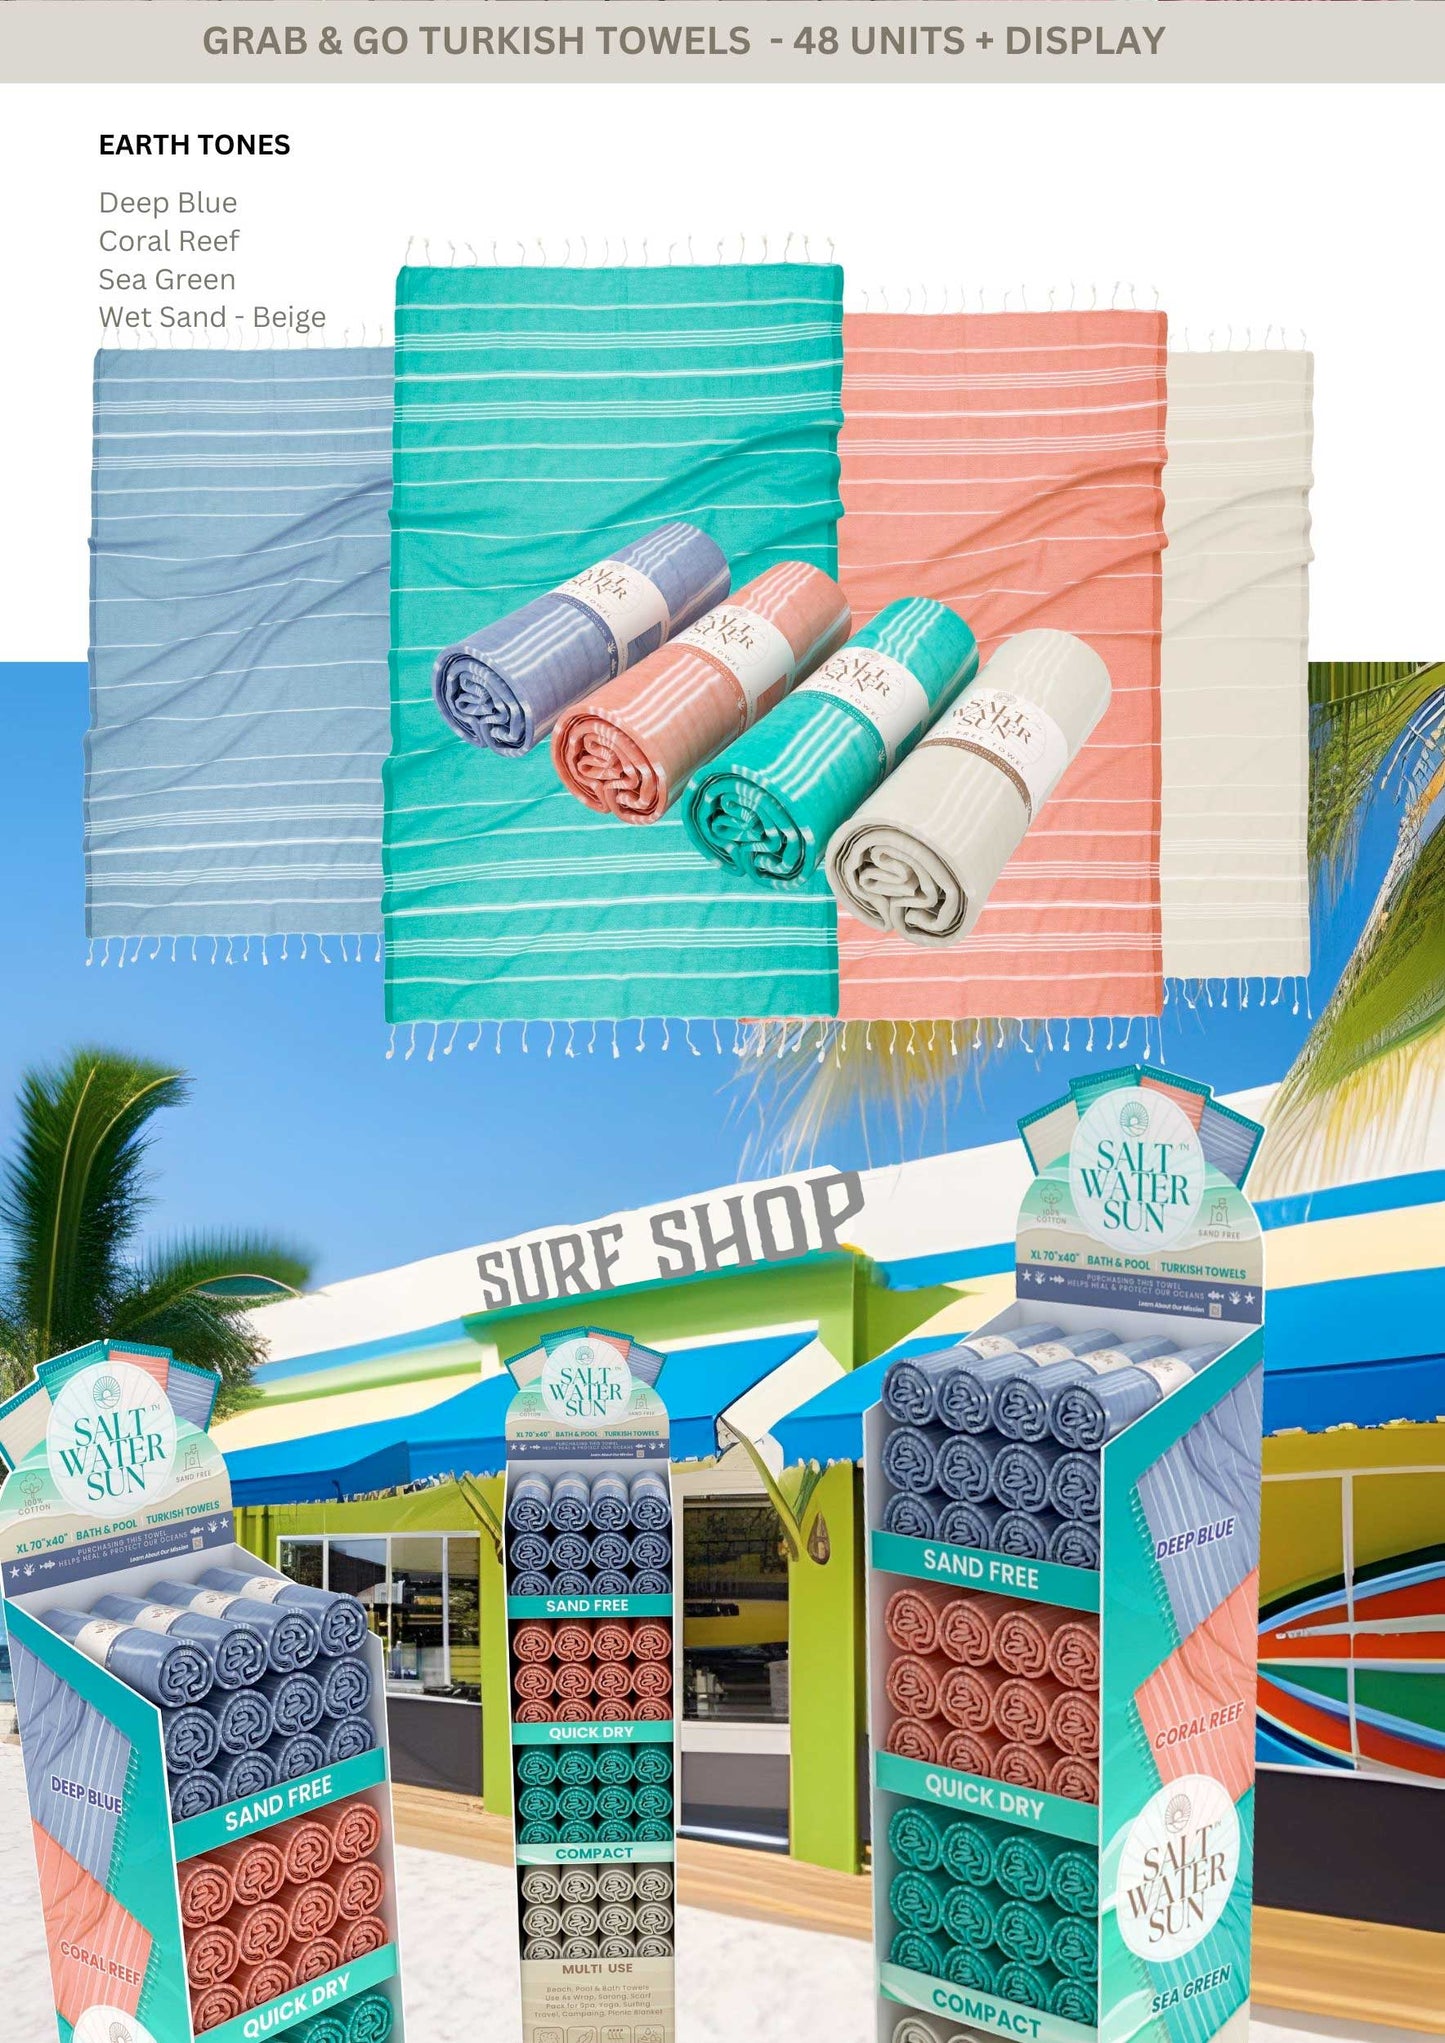 Salt Water Sun - "Grab and Go" Rolled Turkish Towels - 48 Units + Retail Store Display RT789 & RT790